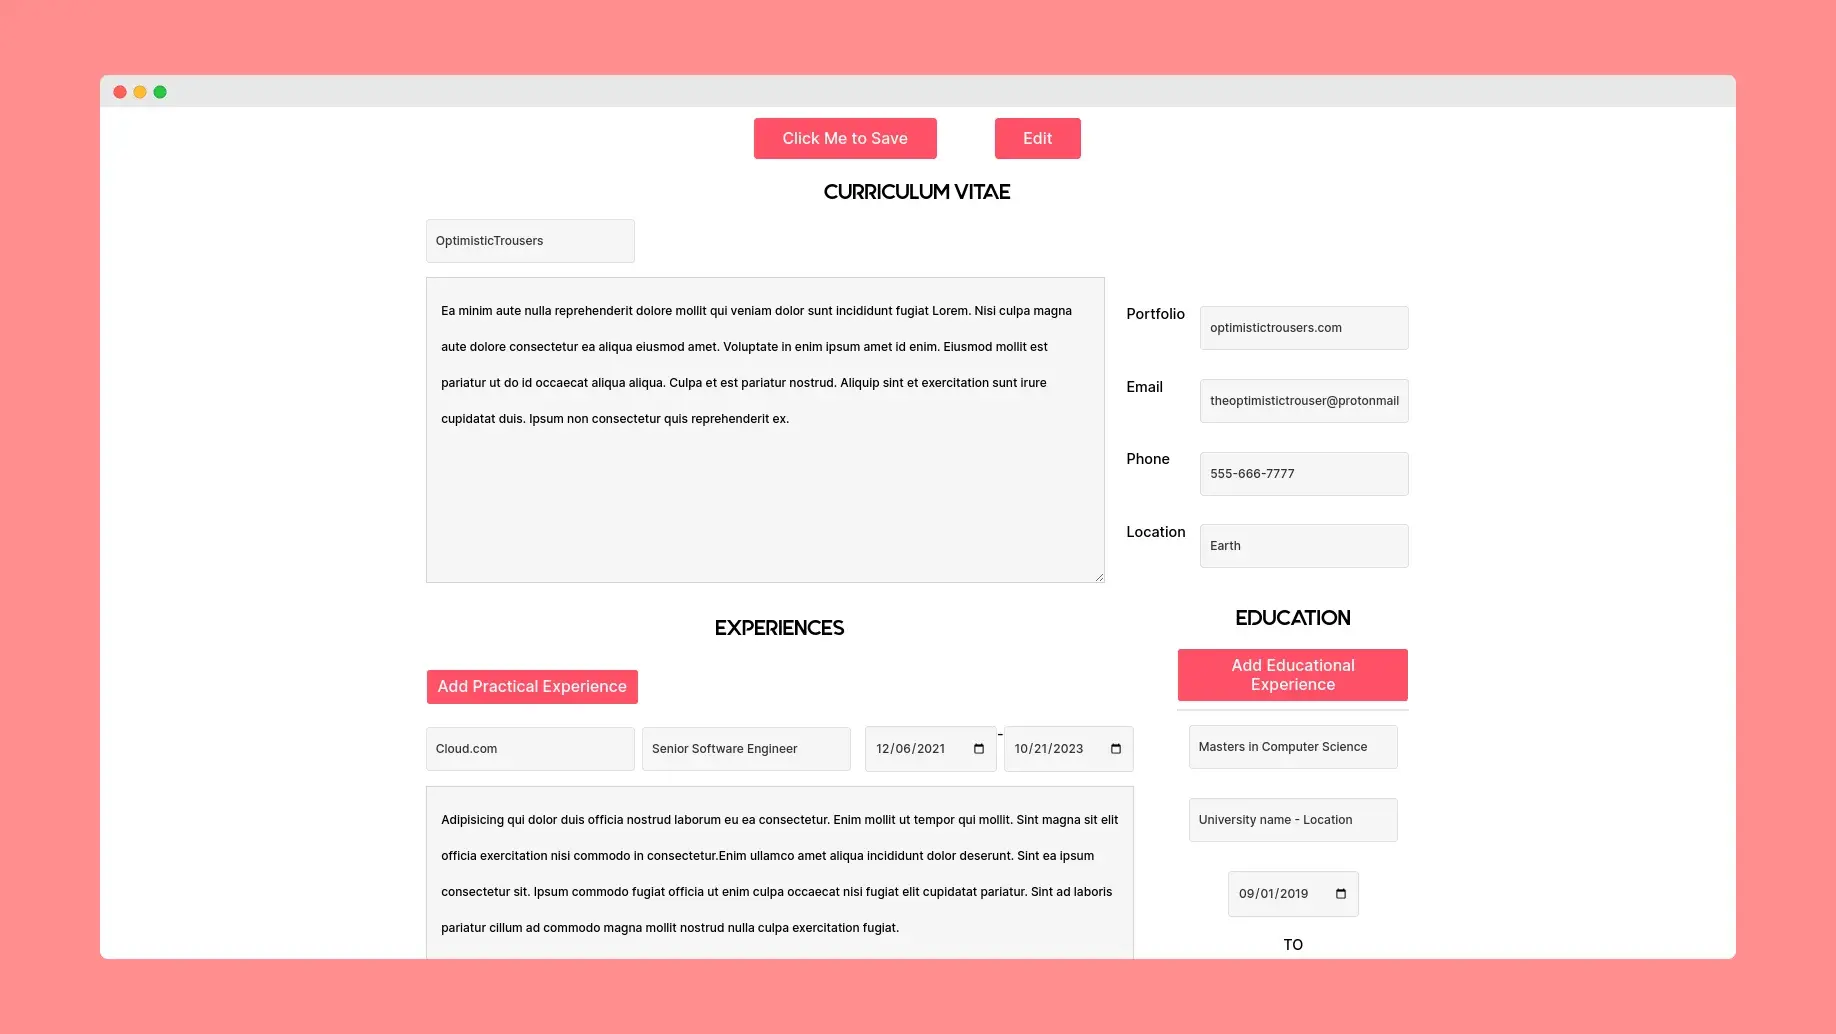 A web interface for a 'Curriculum Vitae' with sections for personal details, experiences, and education. It features editable fields with placeholder data.